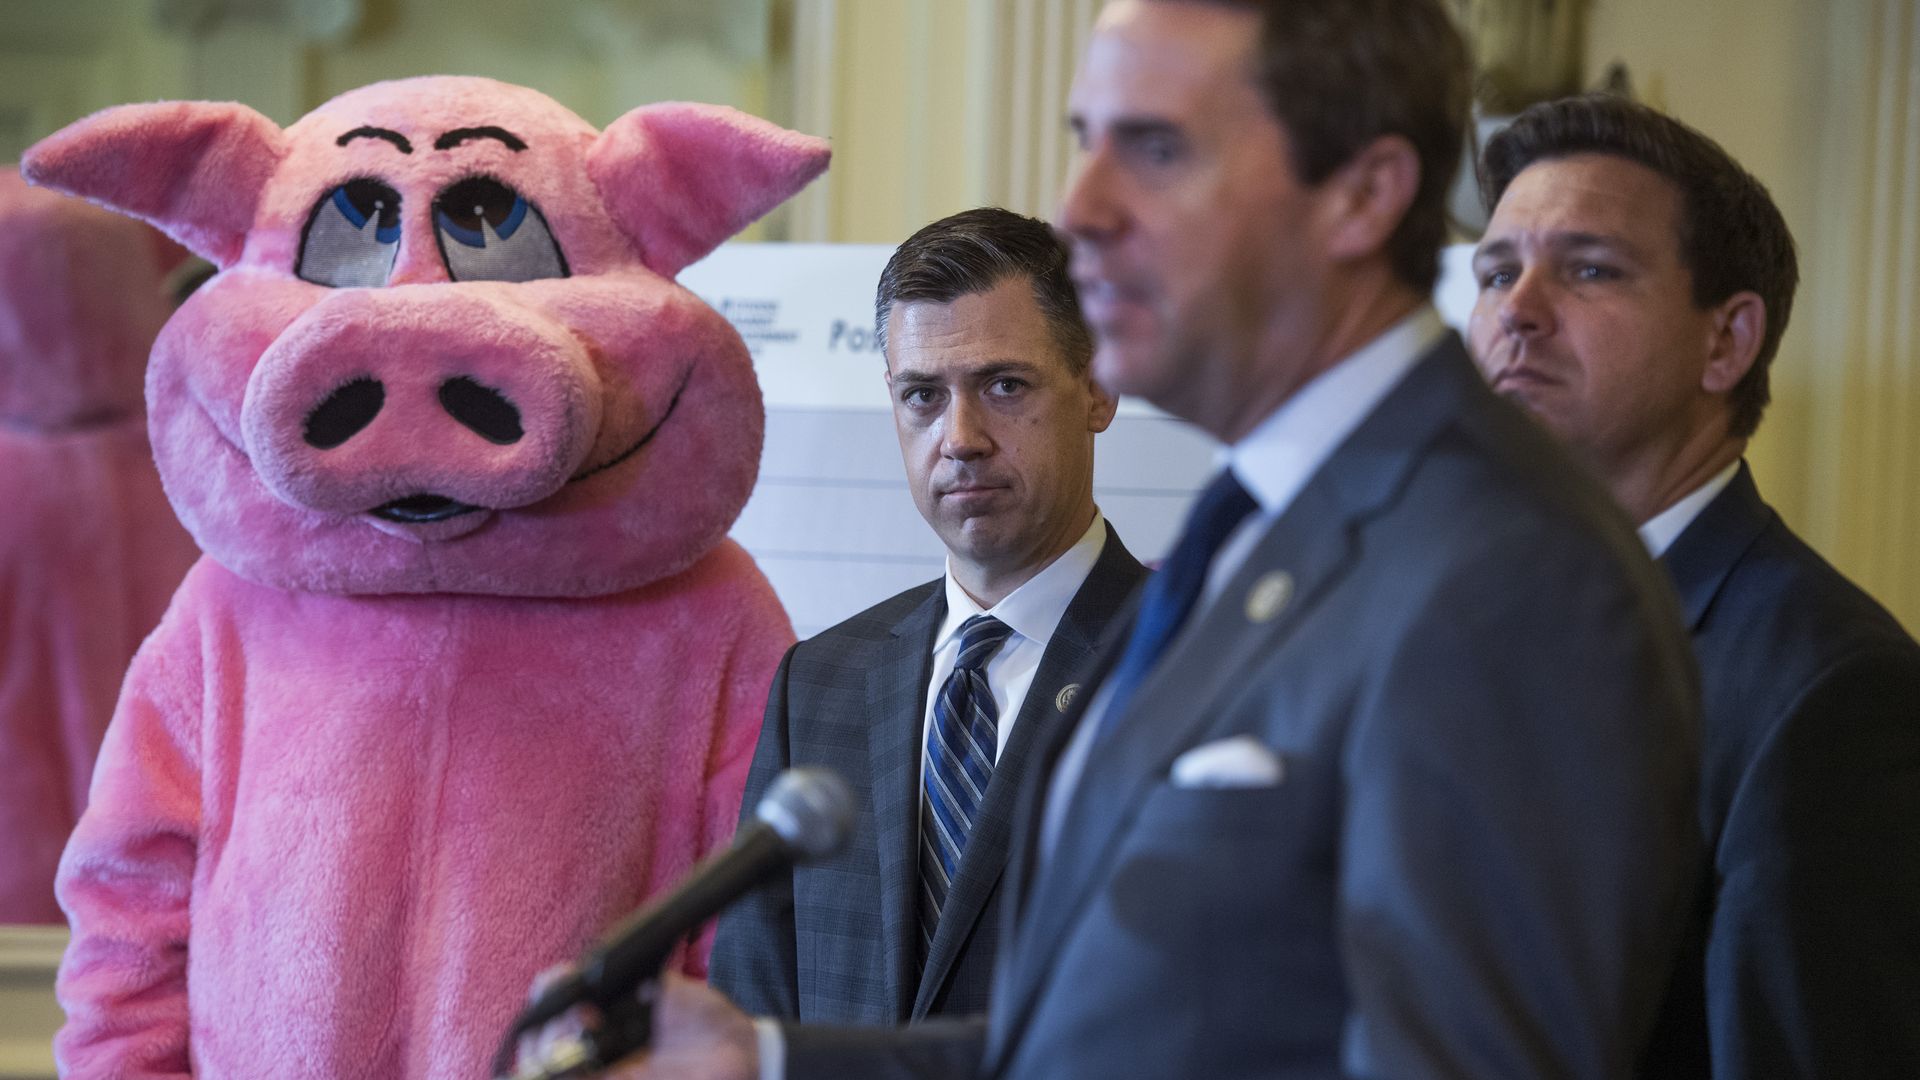 Rep. Jim Banks stands at a press conference next to a pig mascot.